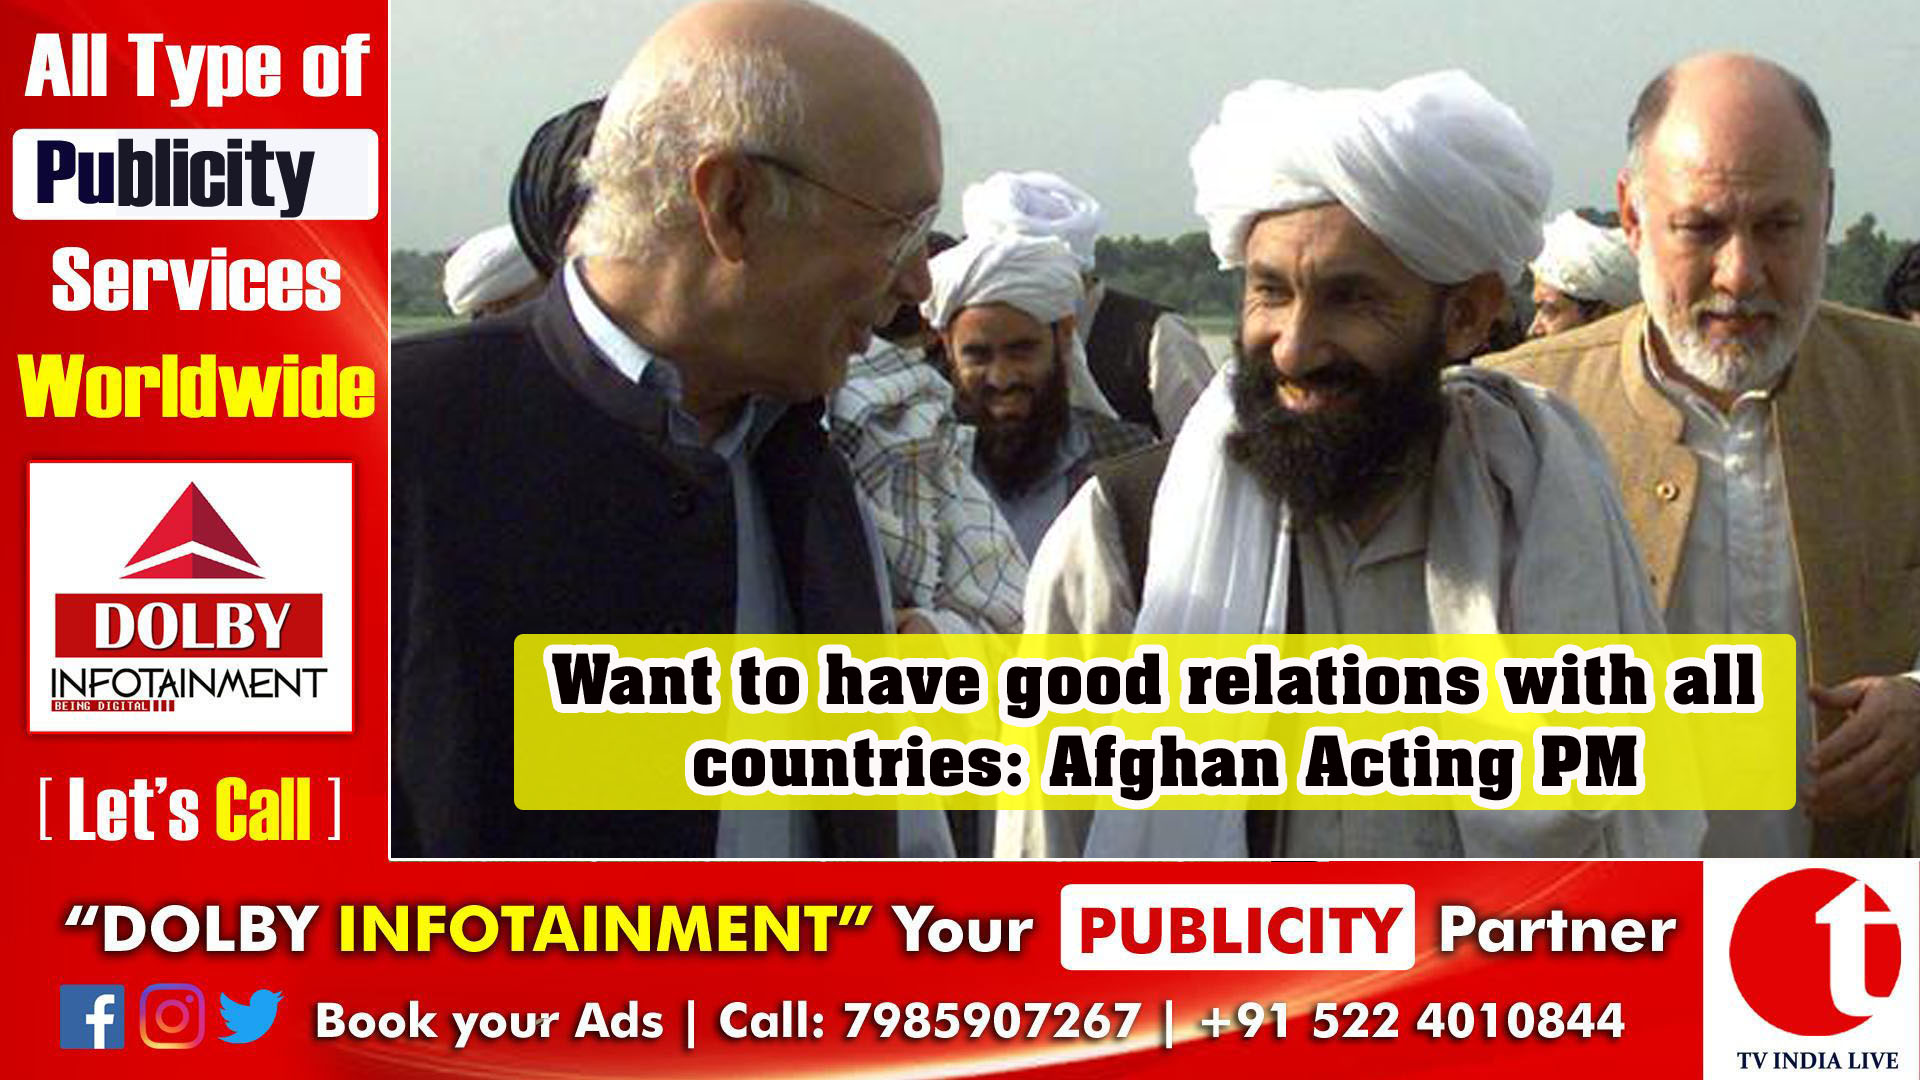 Want to have good relations with all countries: Afghan Acting PM